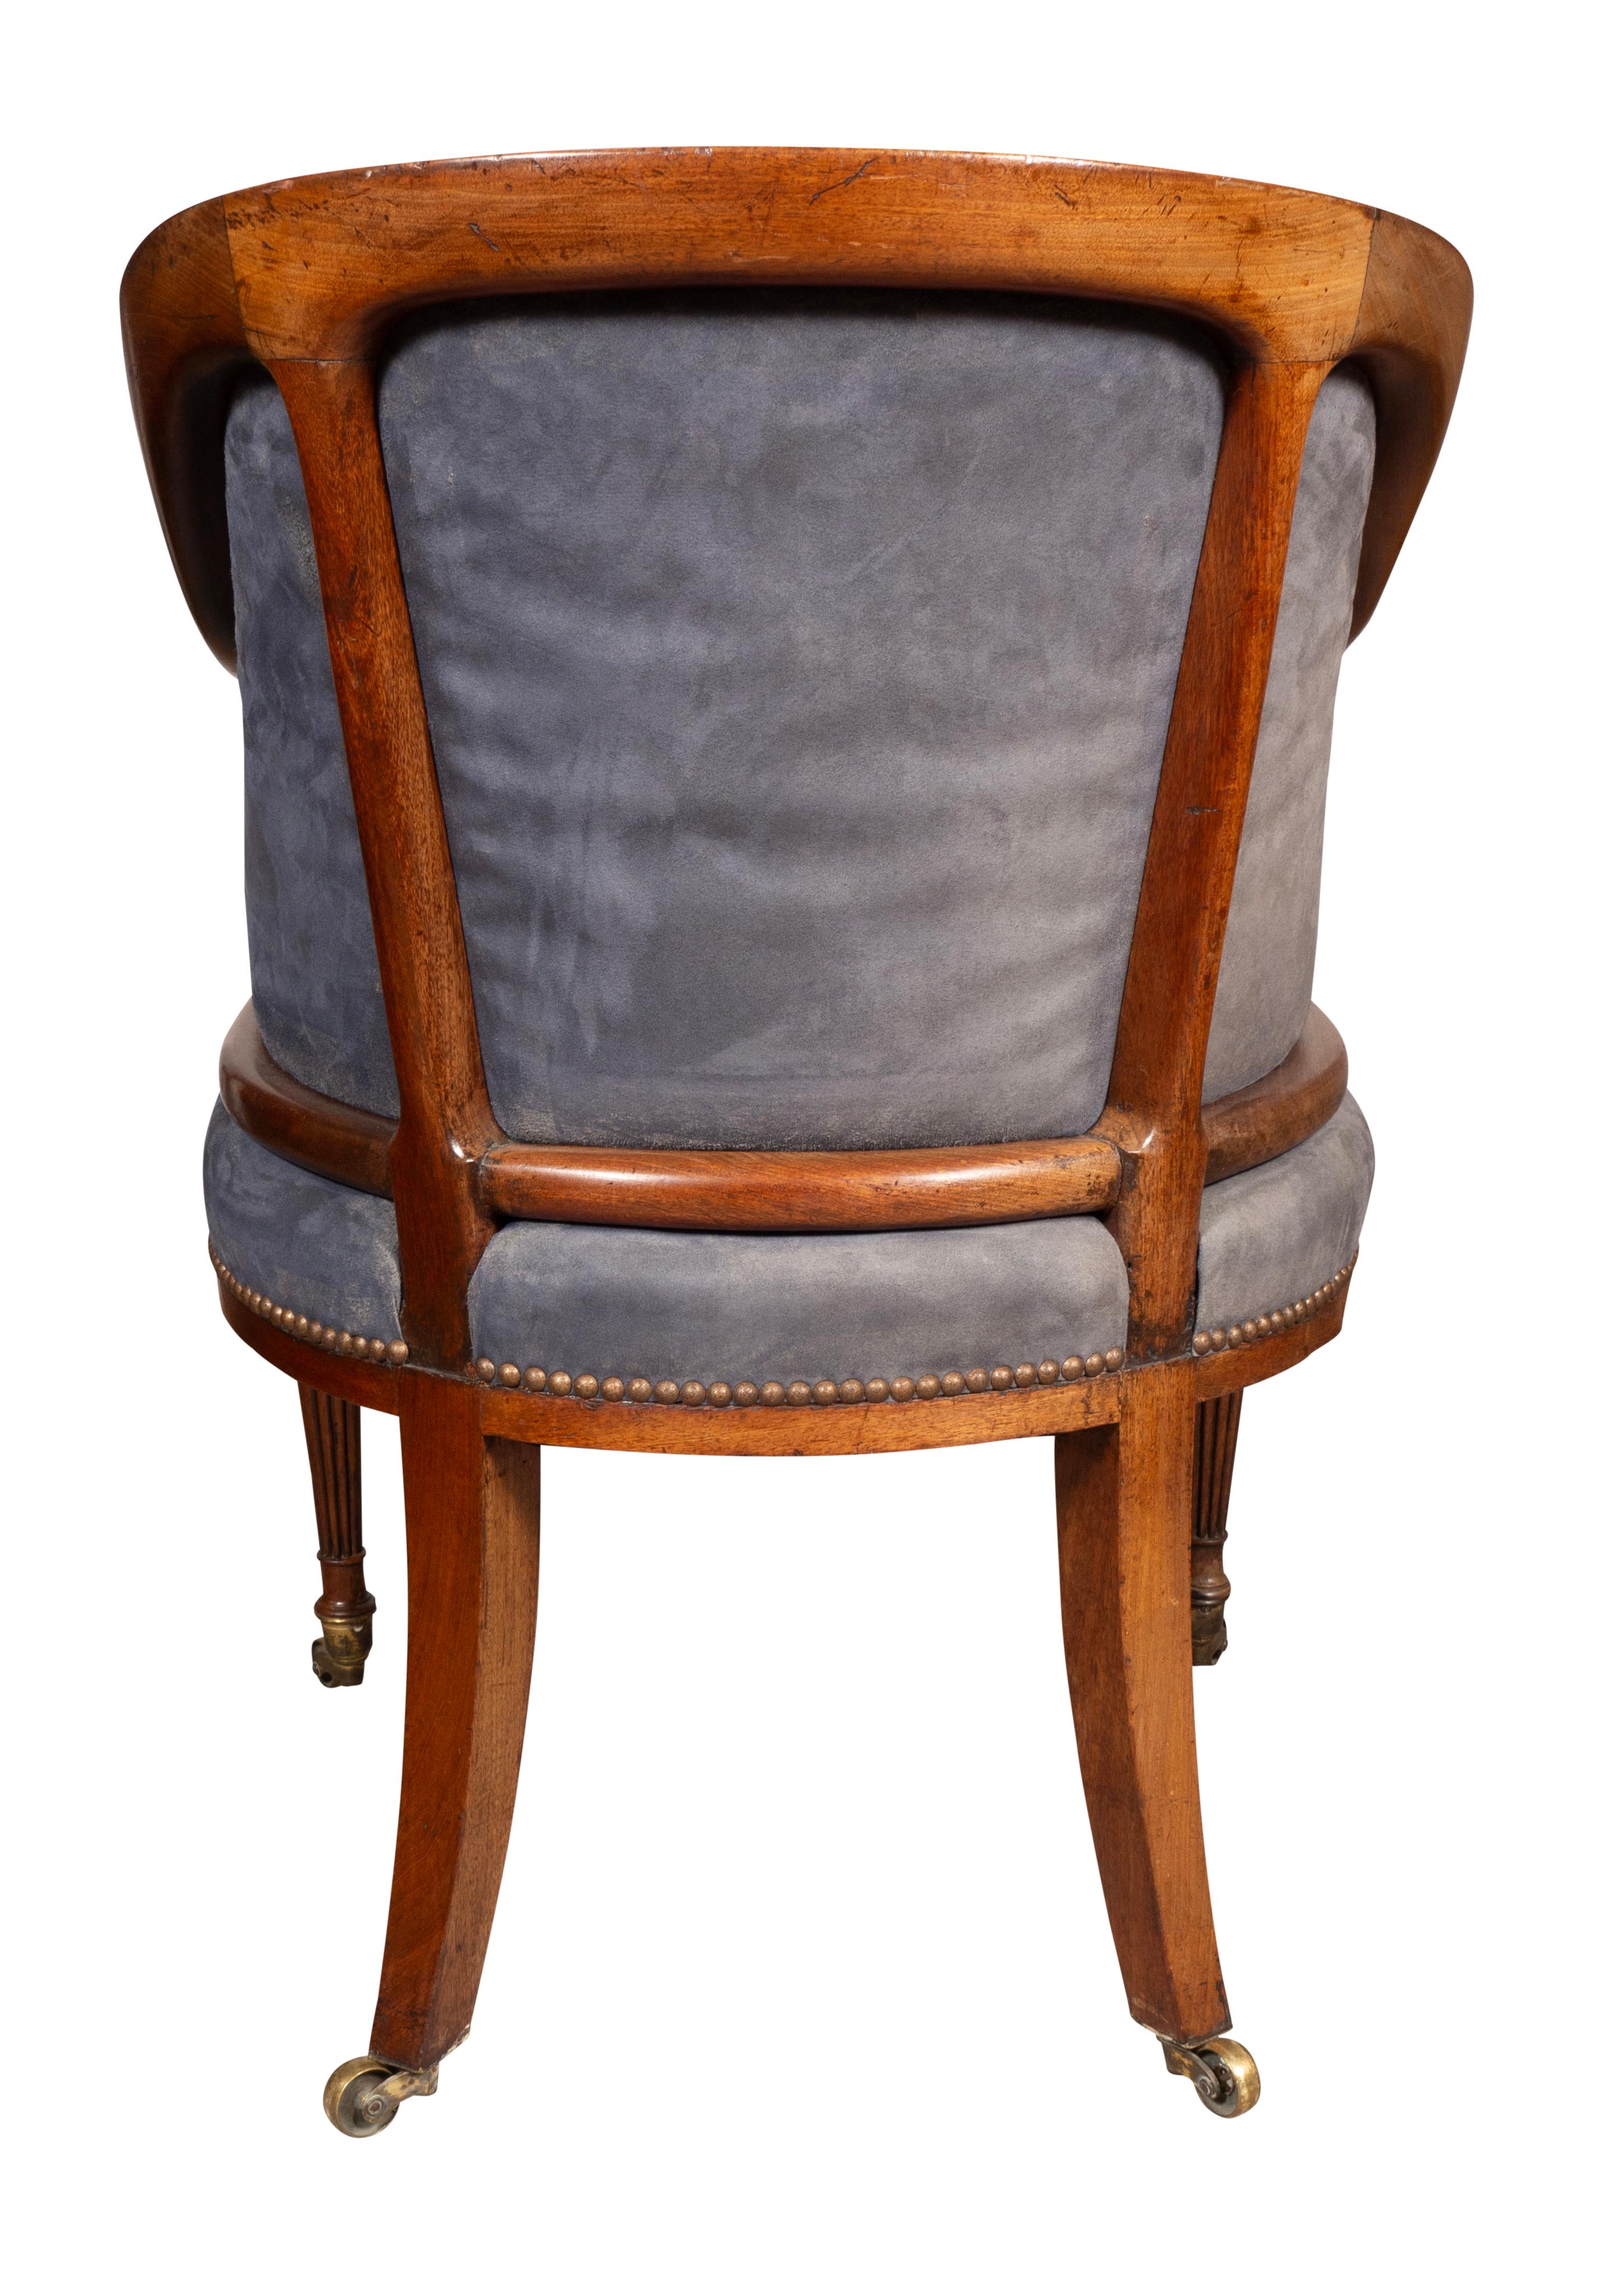 Regency Mahogany Desk Chair In Good Condition For Sale In Essex, MA